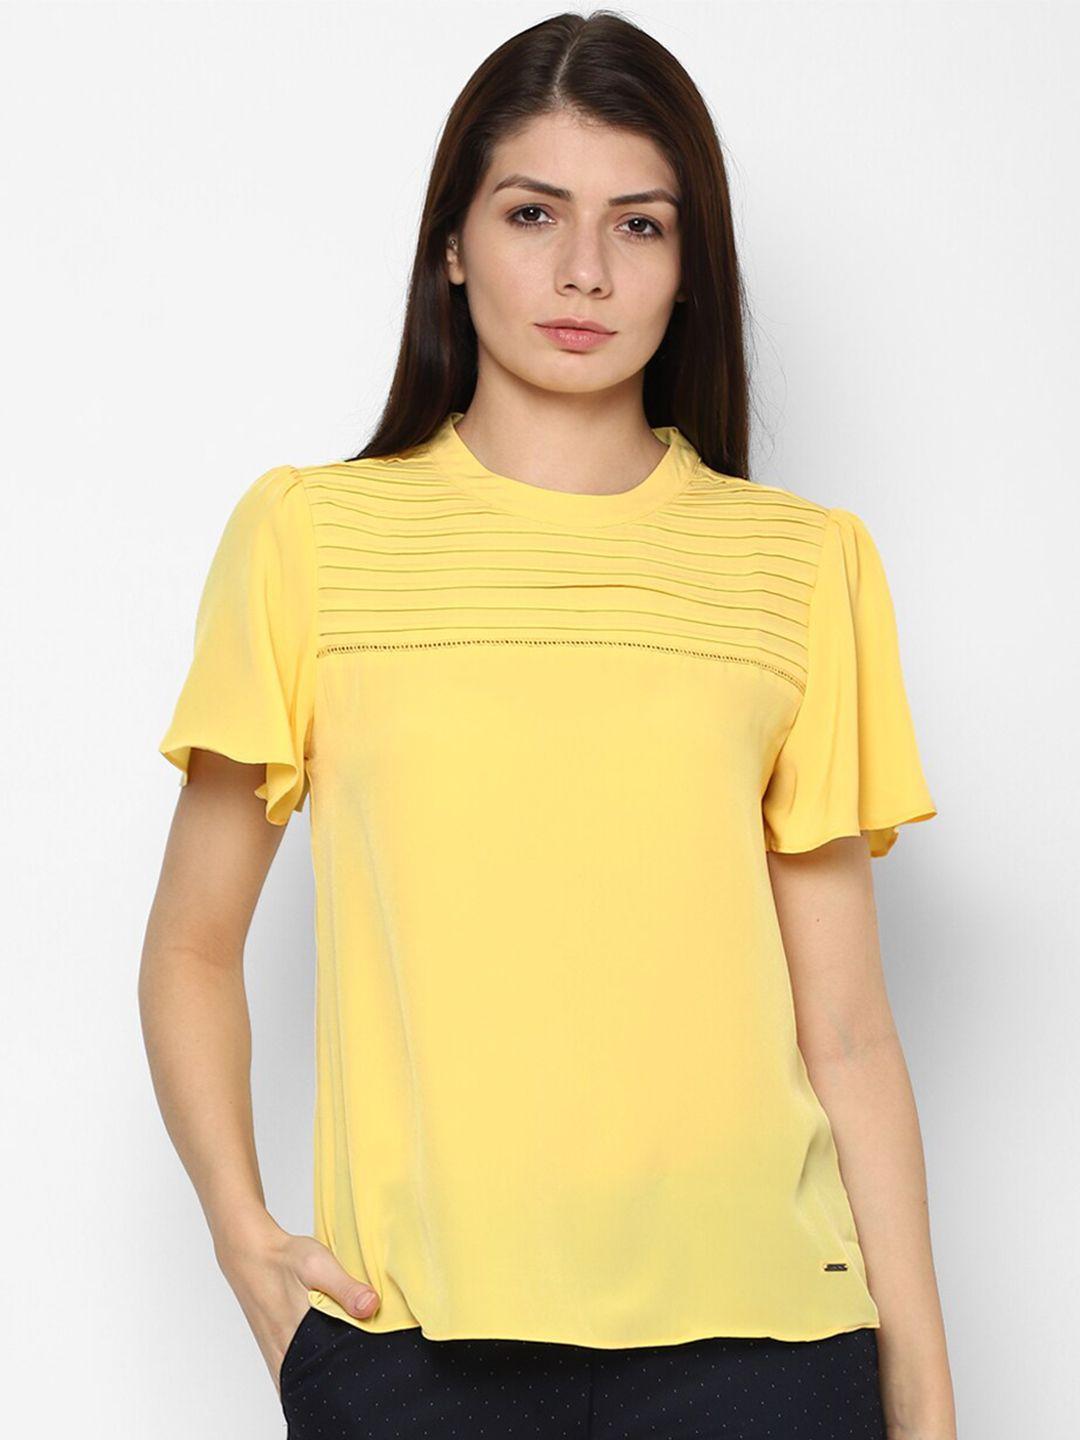 allen solly woman yellow solid top